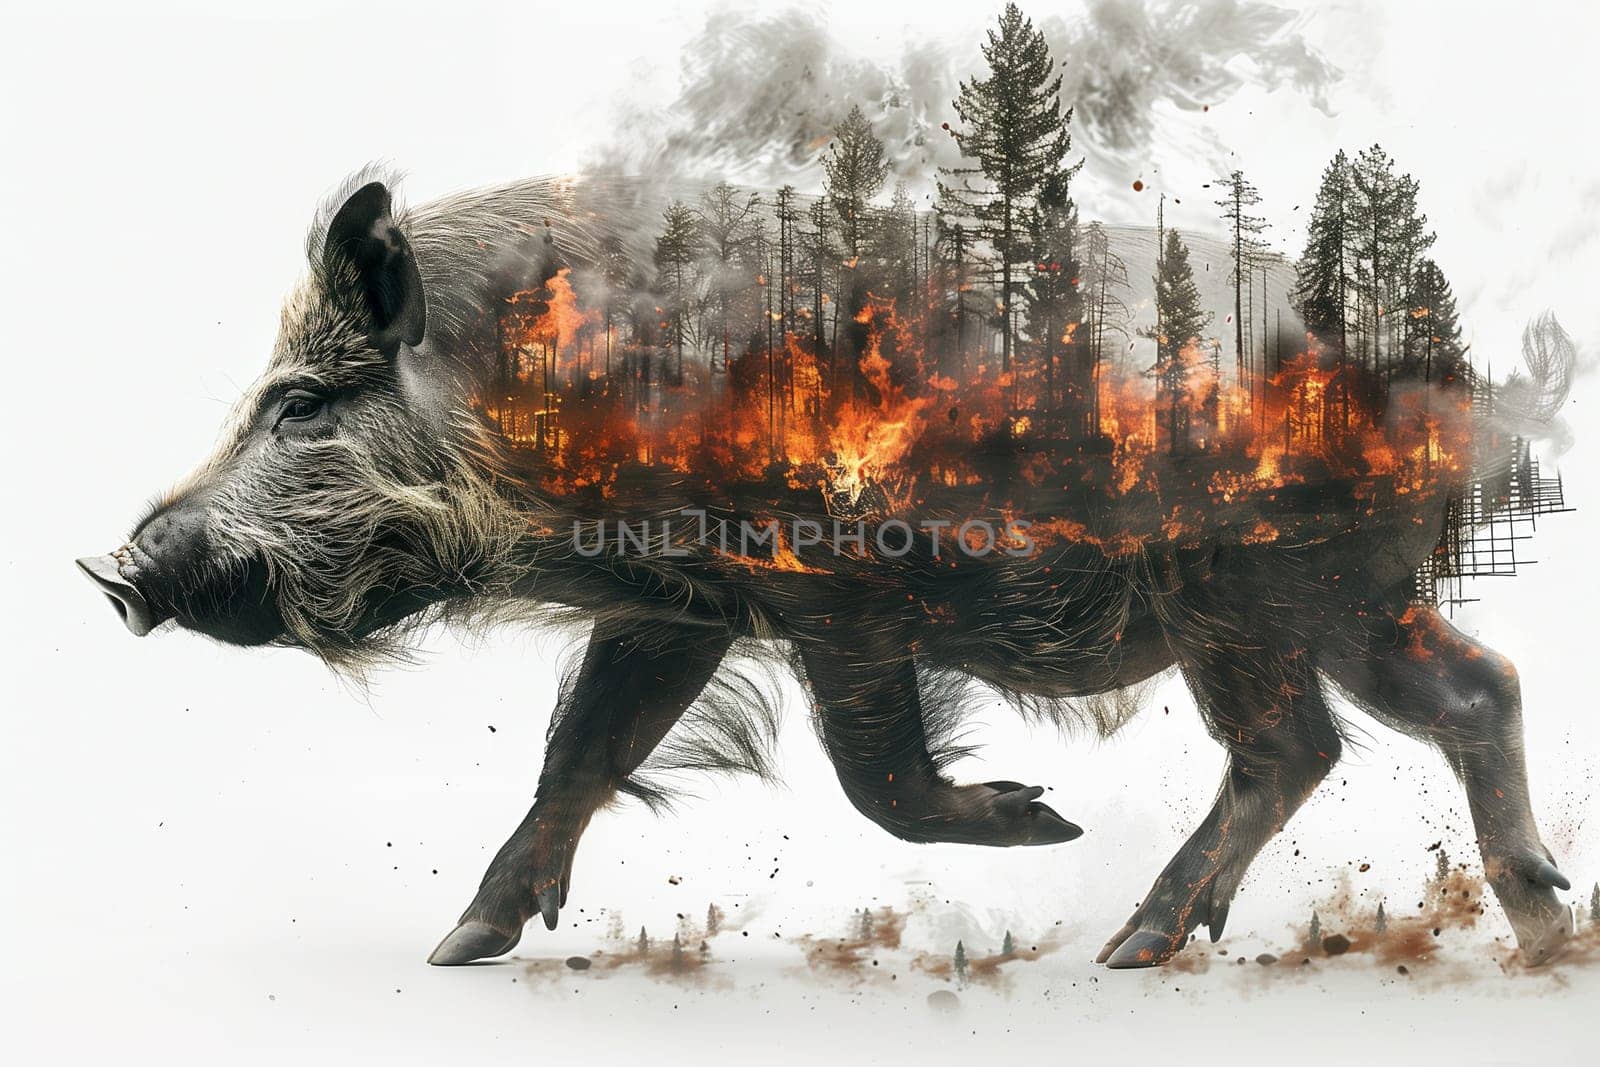 Wild Boar Covered in Forest Fire Imagery, Highlighting Wildlife Danger and Ecological Crisis by Sd28DimoN_1976